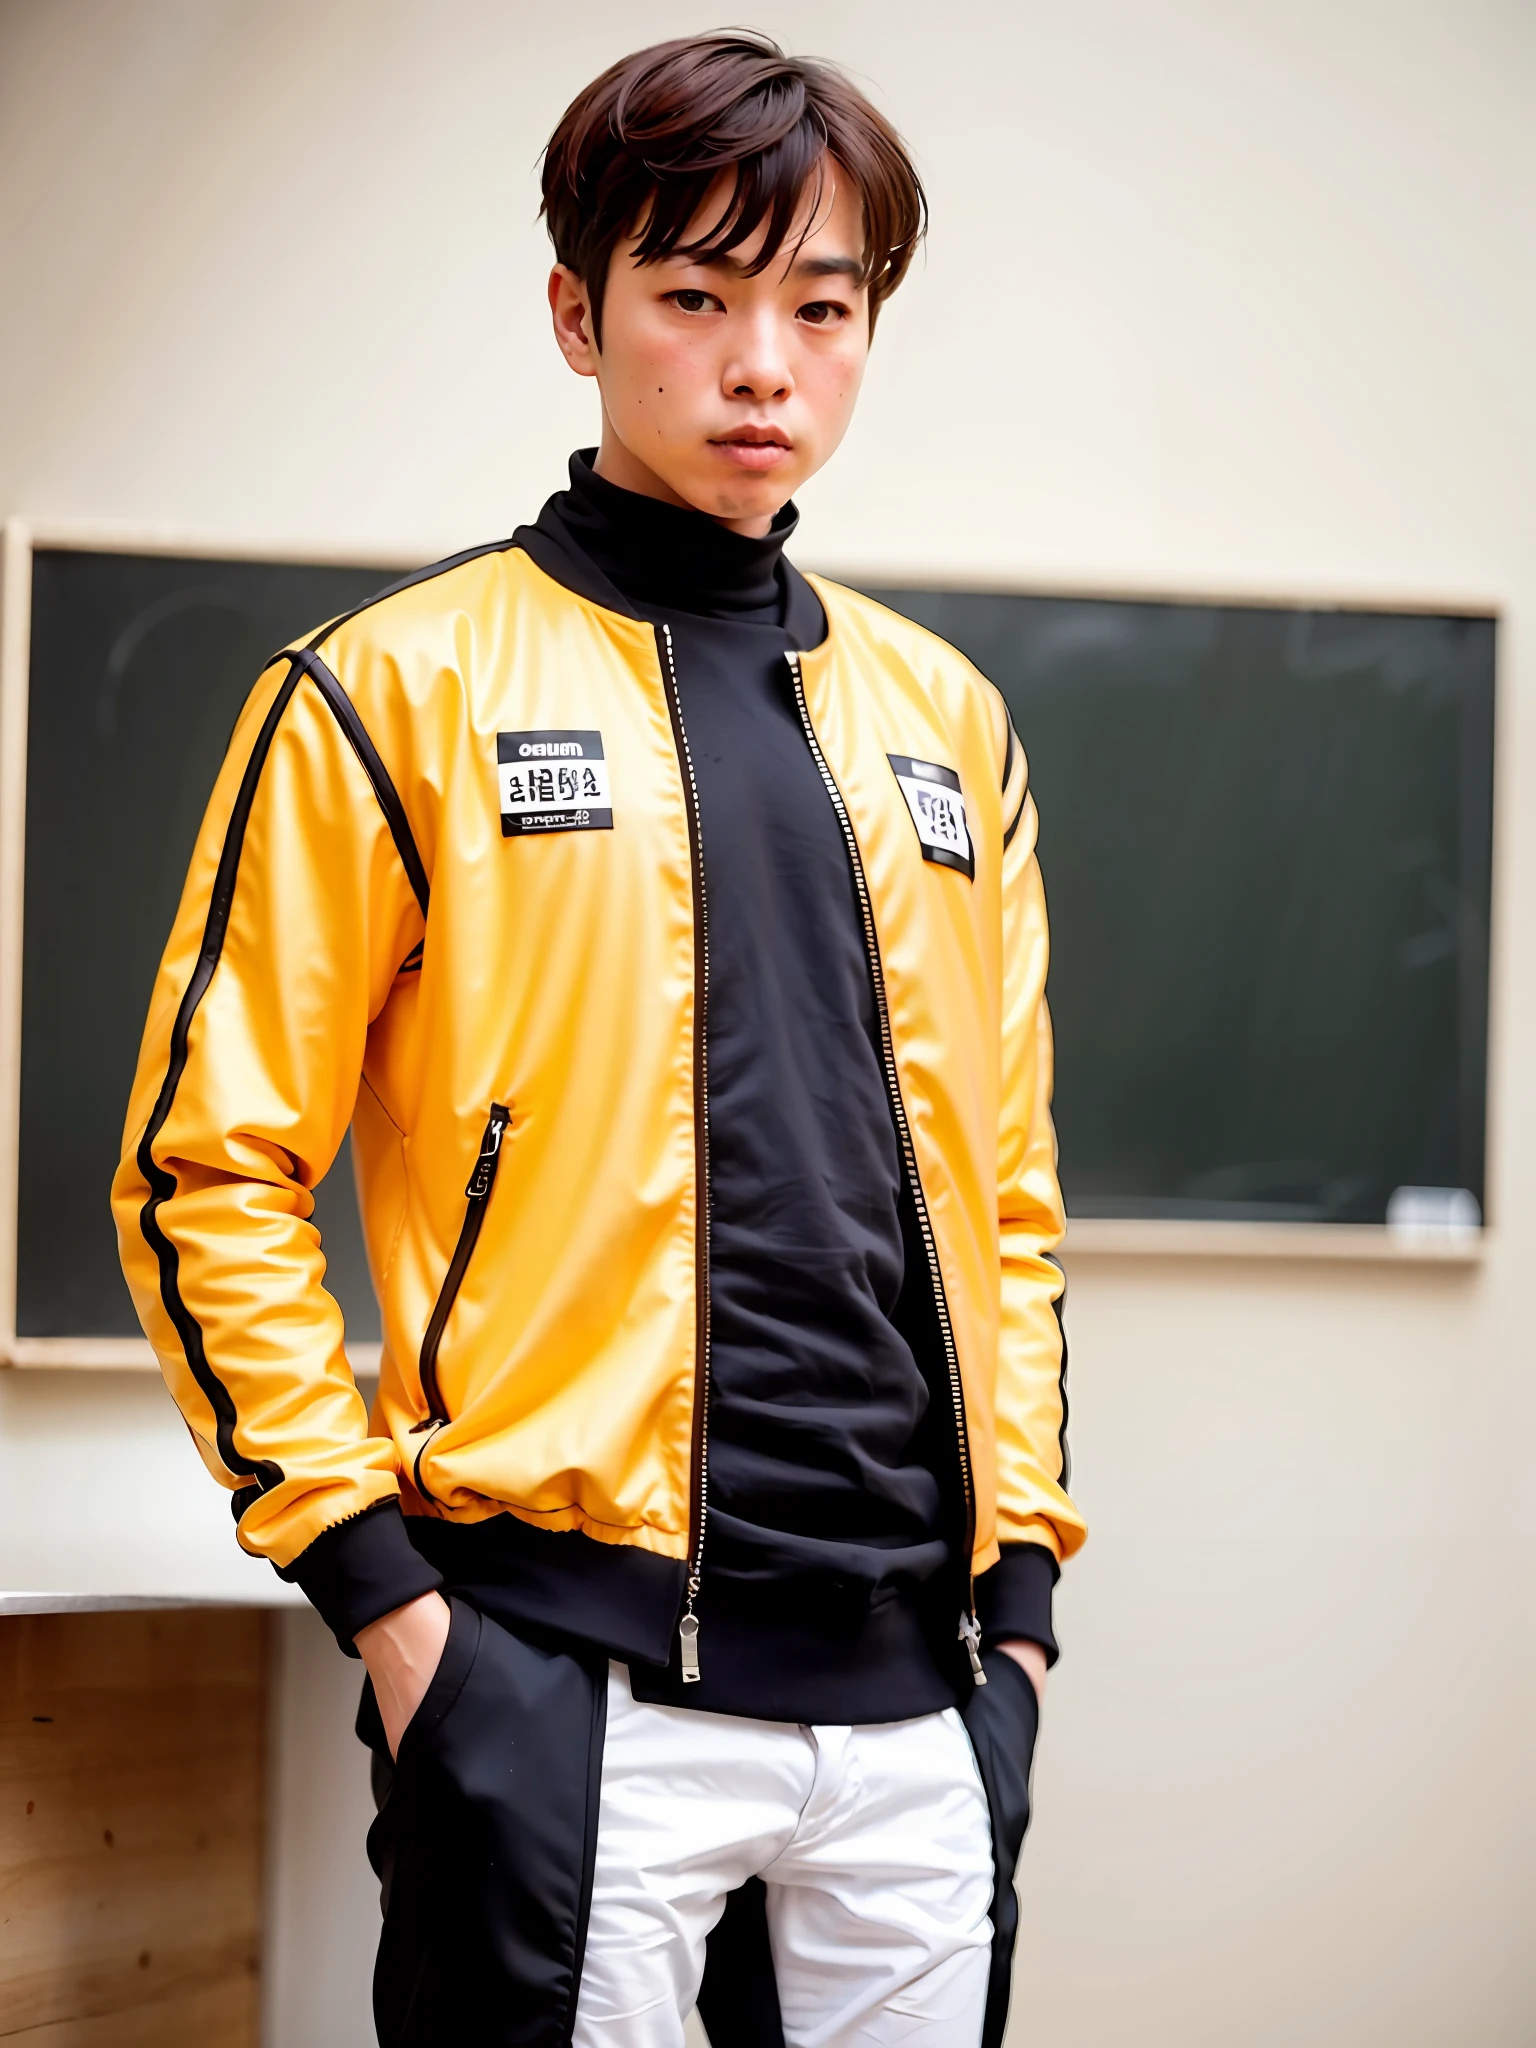 A Arafeld man in a yellow jacket stands in front of the blackboard, wearing track and field suit, inspired by Wen Zhengming, inspired by Qu Leilei, inspired by Wen Zhenheng, inspired by Li Tiefu, inspired by Chen Daofu, wenjun lin, inspired by Ye Xin, Inspired by Bian Shoumin, jinyiwei